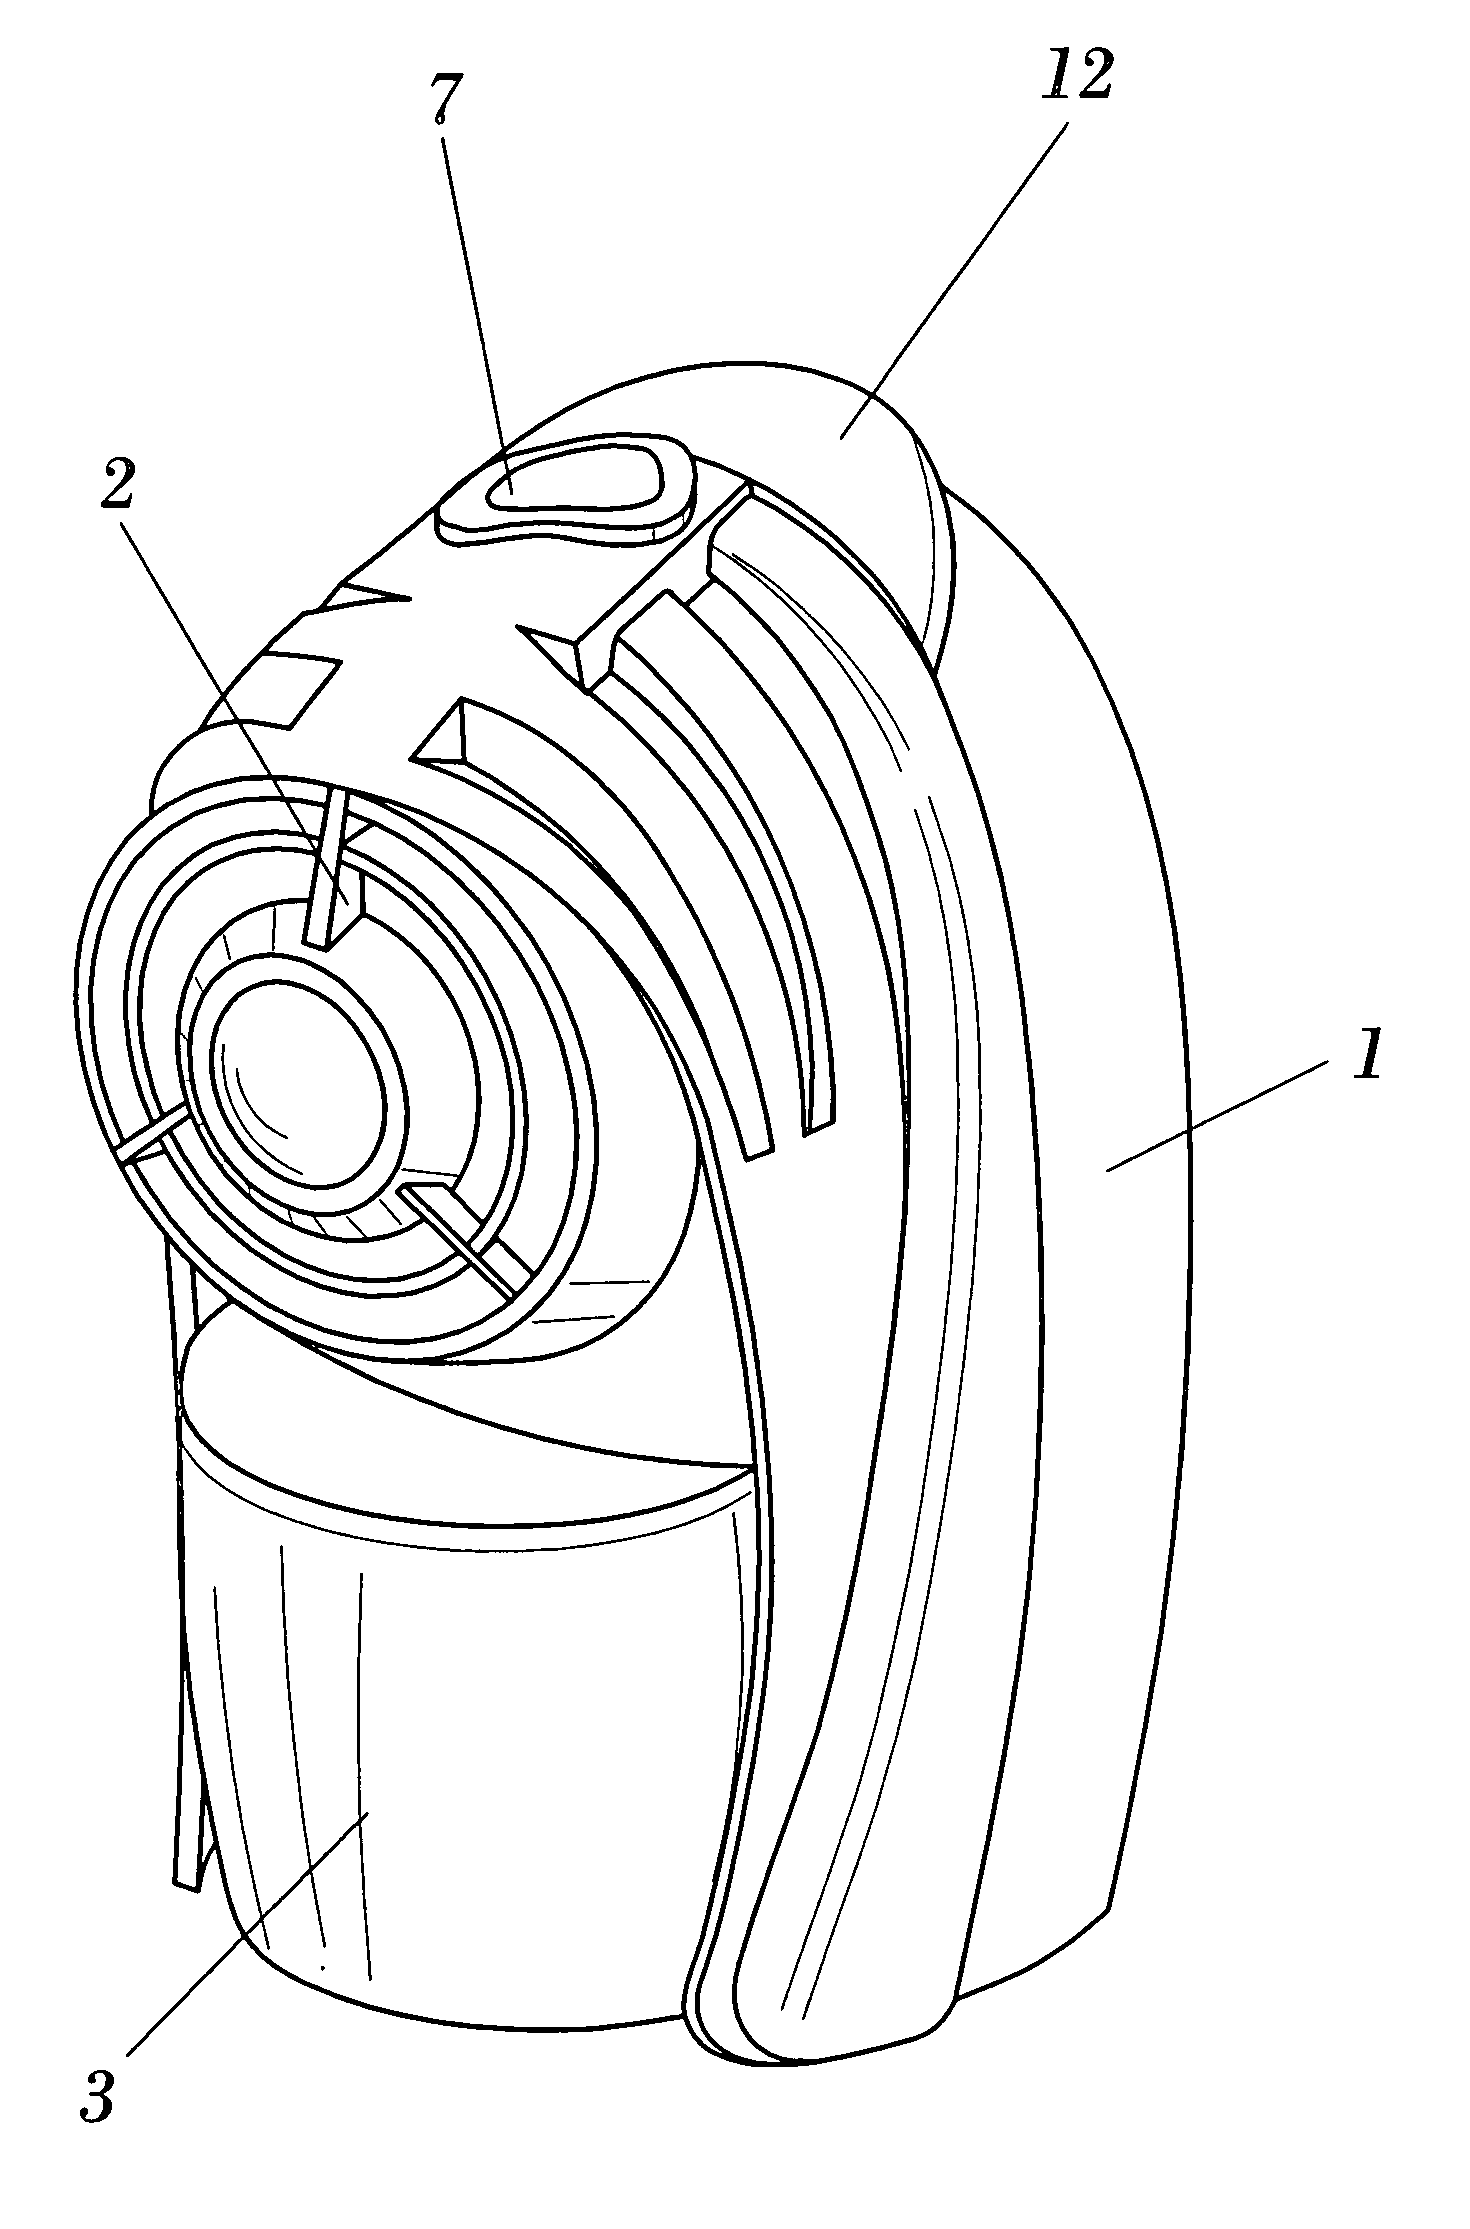 Evaporator device for active substances with fan